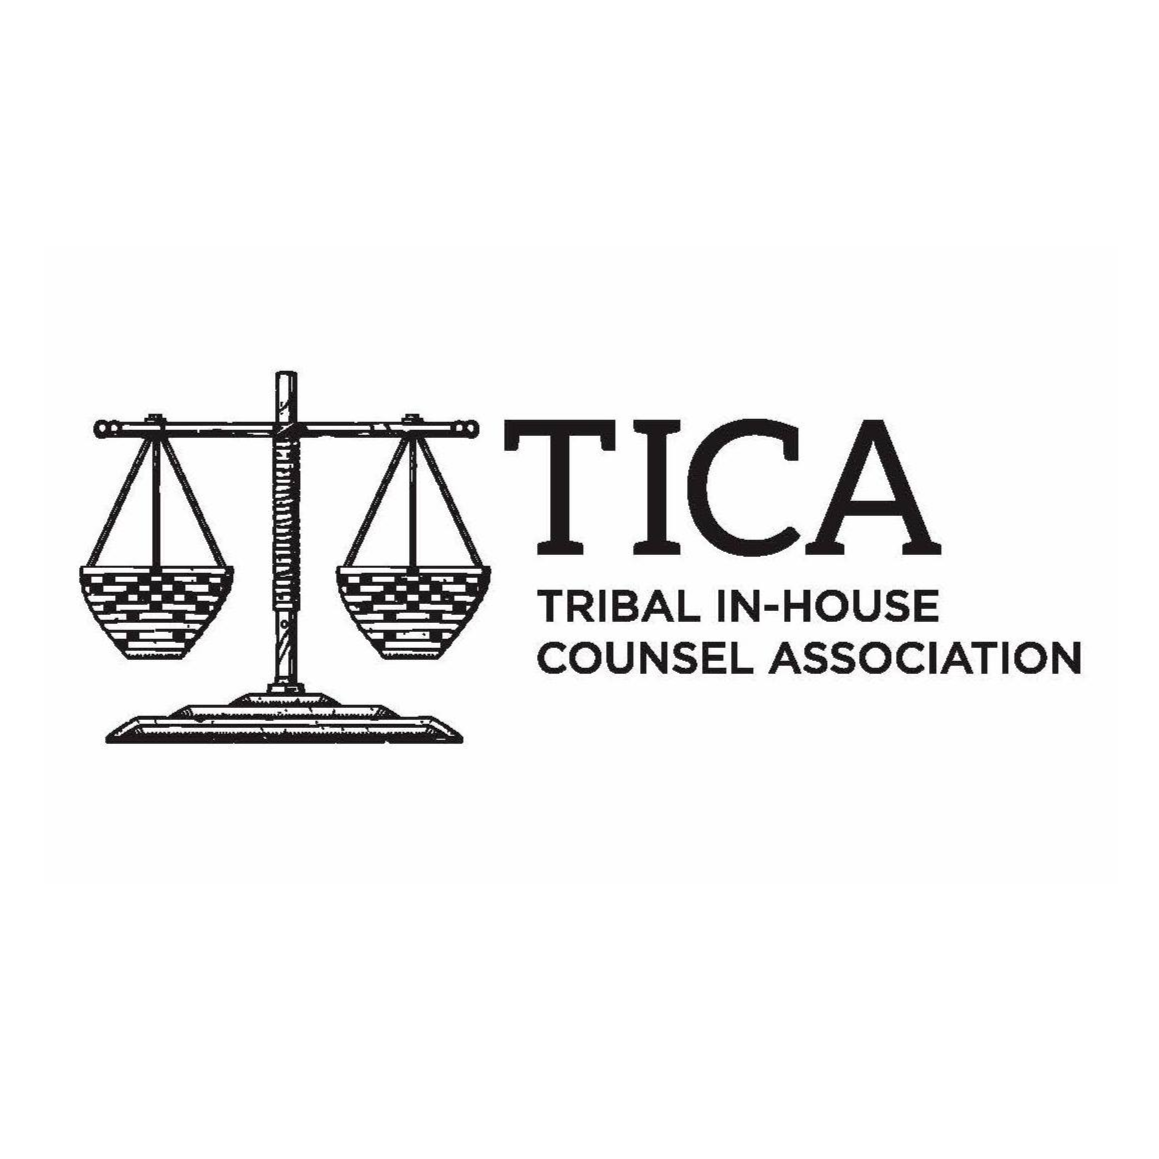 Native American Organizations in USA - Tribal In-house Counsel Association